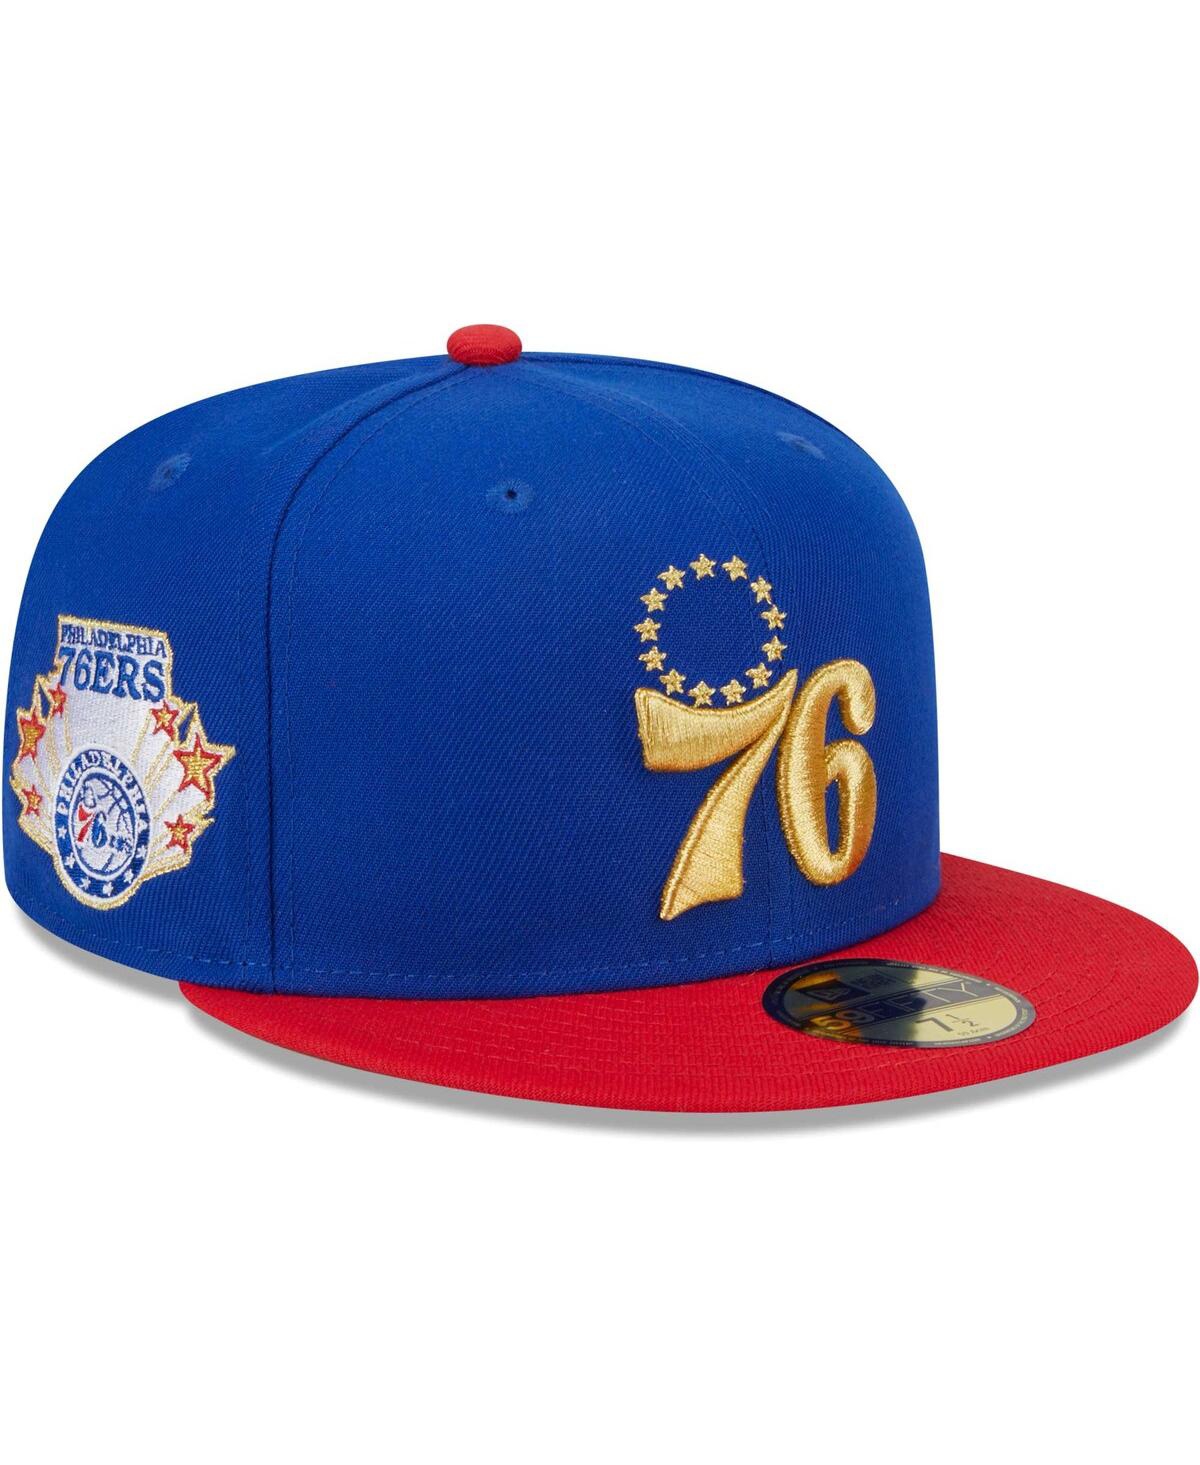 Men's New Era Royal, Red Philadelphia 76ers Gameday Gold Pop Stars 59FIFTY Fitted Hat - Royal, Red